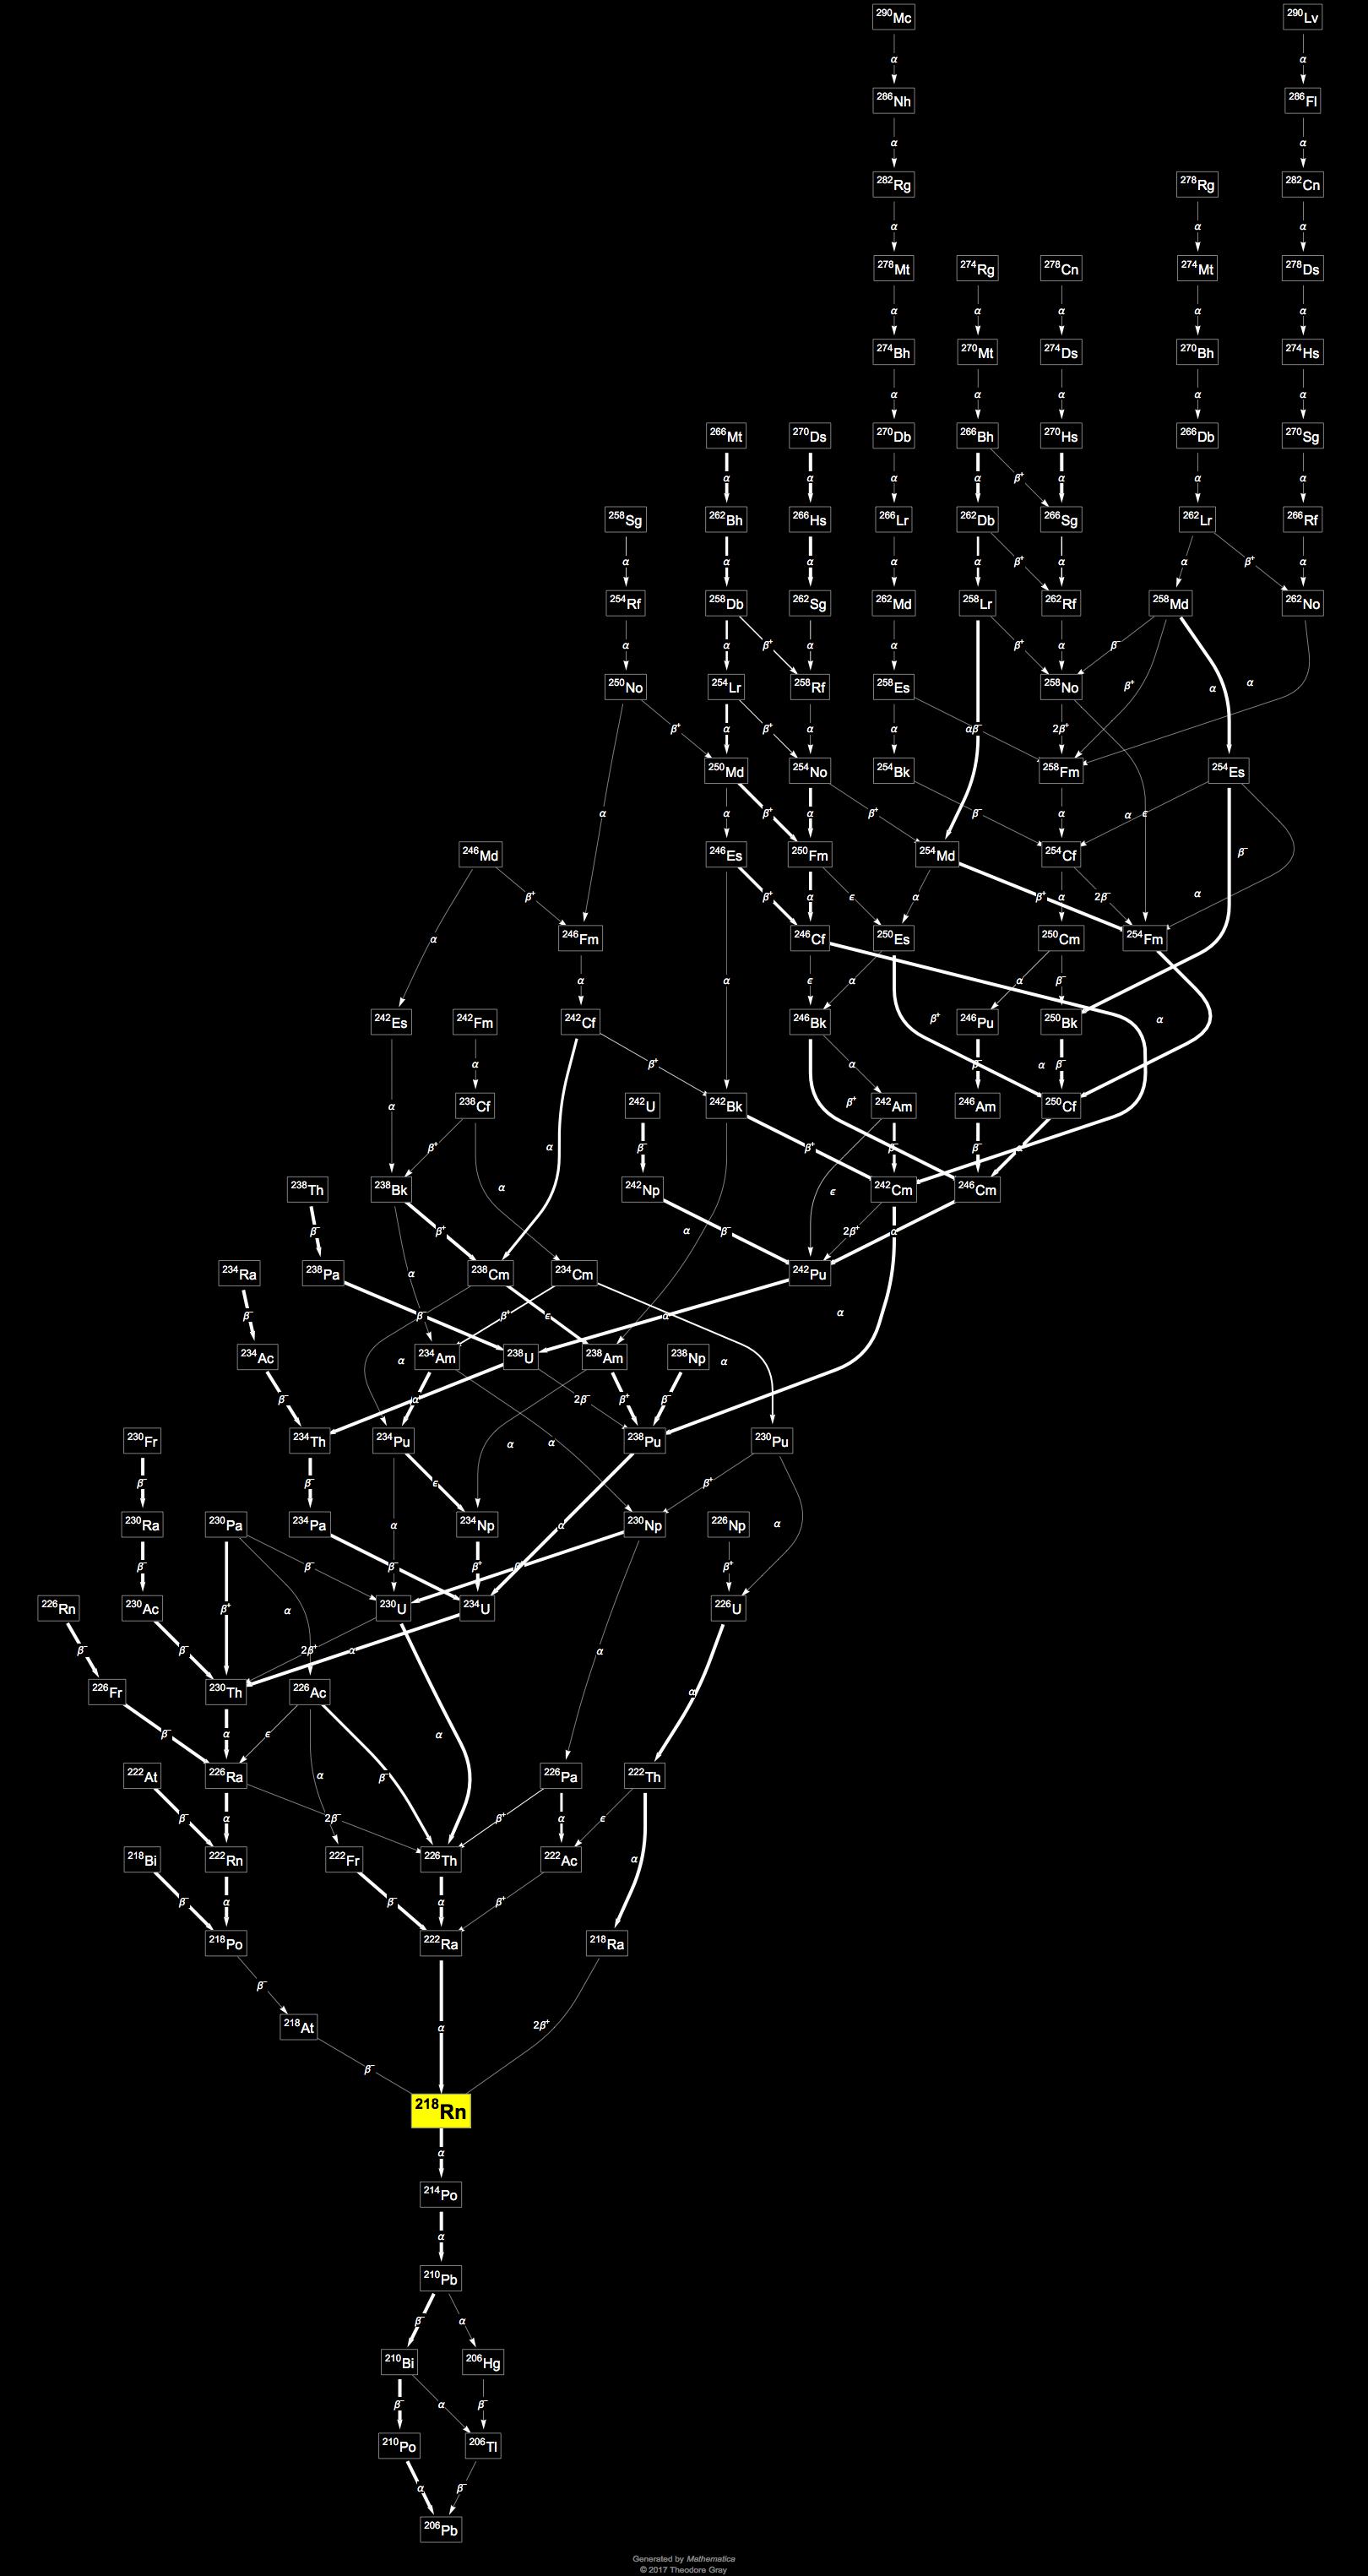 Decay Chain Image